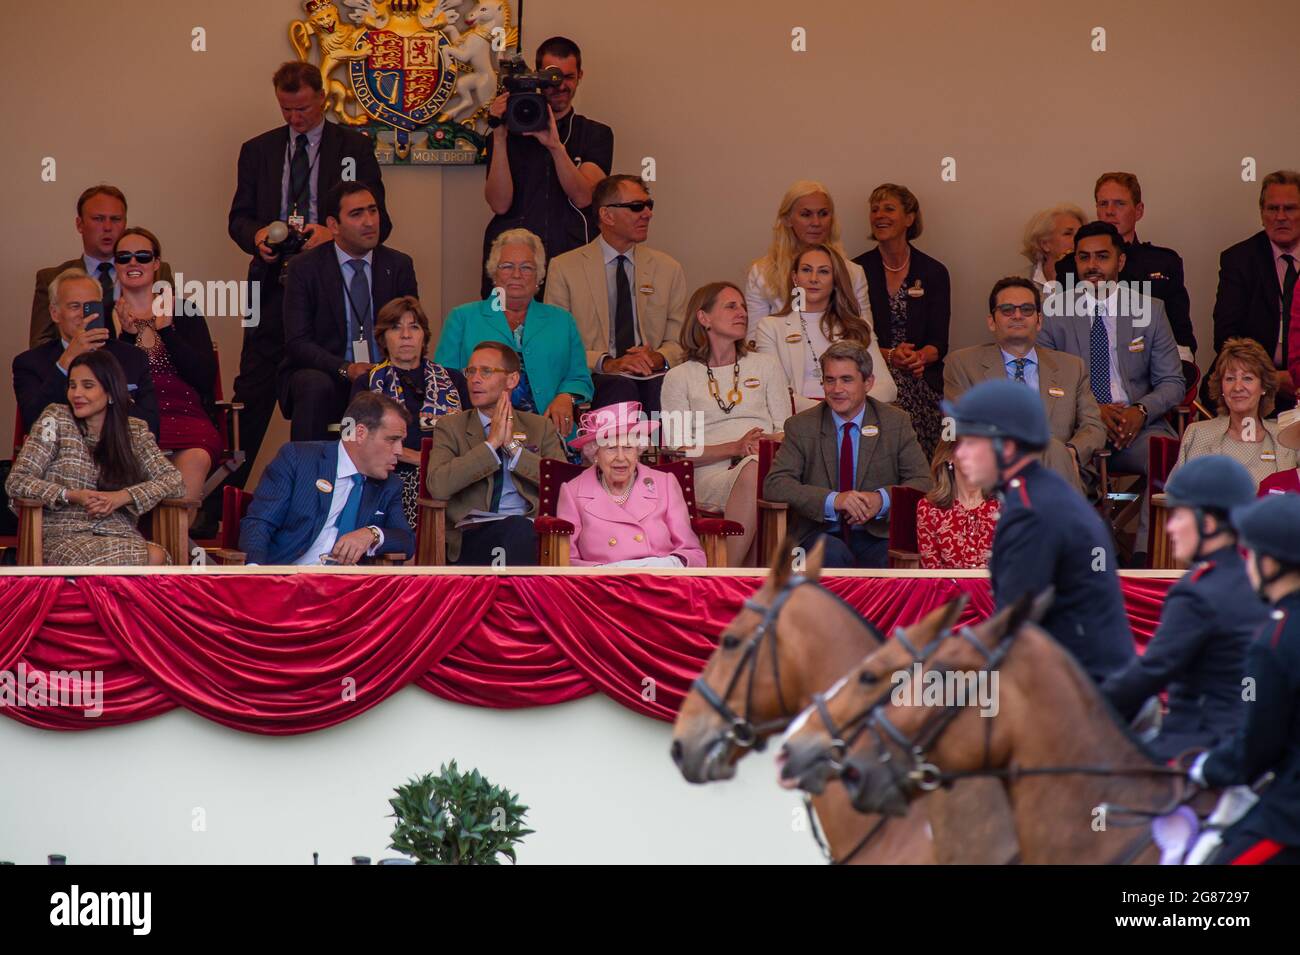 Windsor, Berkshire, UK. 3rd July, 2021. Queen Elizabeth II wore a pale pink coat and hat this afternoon in the Royal Box at Royal Windsor Horse Show as she watched the Land Rover Services Team Jumping Parade. Credit: Maureen McLean/Alamy Stock Photo